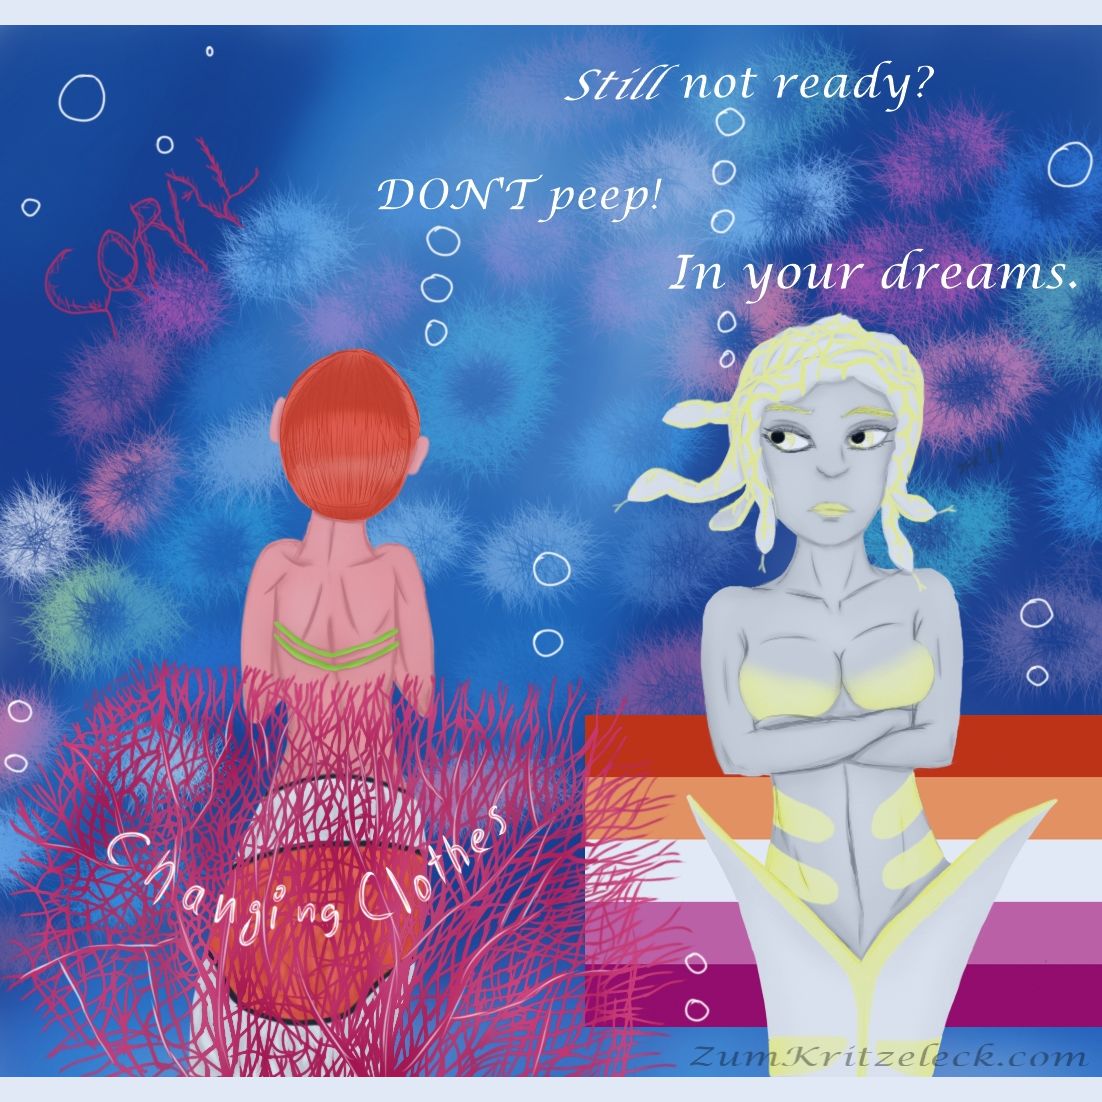 Digital painting, comic style: Nema, the clownfish mermaid with short orange hair standing behind a big red coral in front of a lot of sea anemones. In the right corner of the painting Merdusa, the Medusa mermaid (greyisch blue skin, white snakes on her head, white tail with yellow spots) crossing arms, behind her you can see the Lesbian Pride flag text: M.: "Still not ready?" - N.: "DON'T peep!" - M.: "In your dreams."